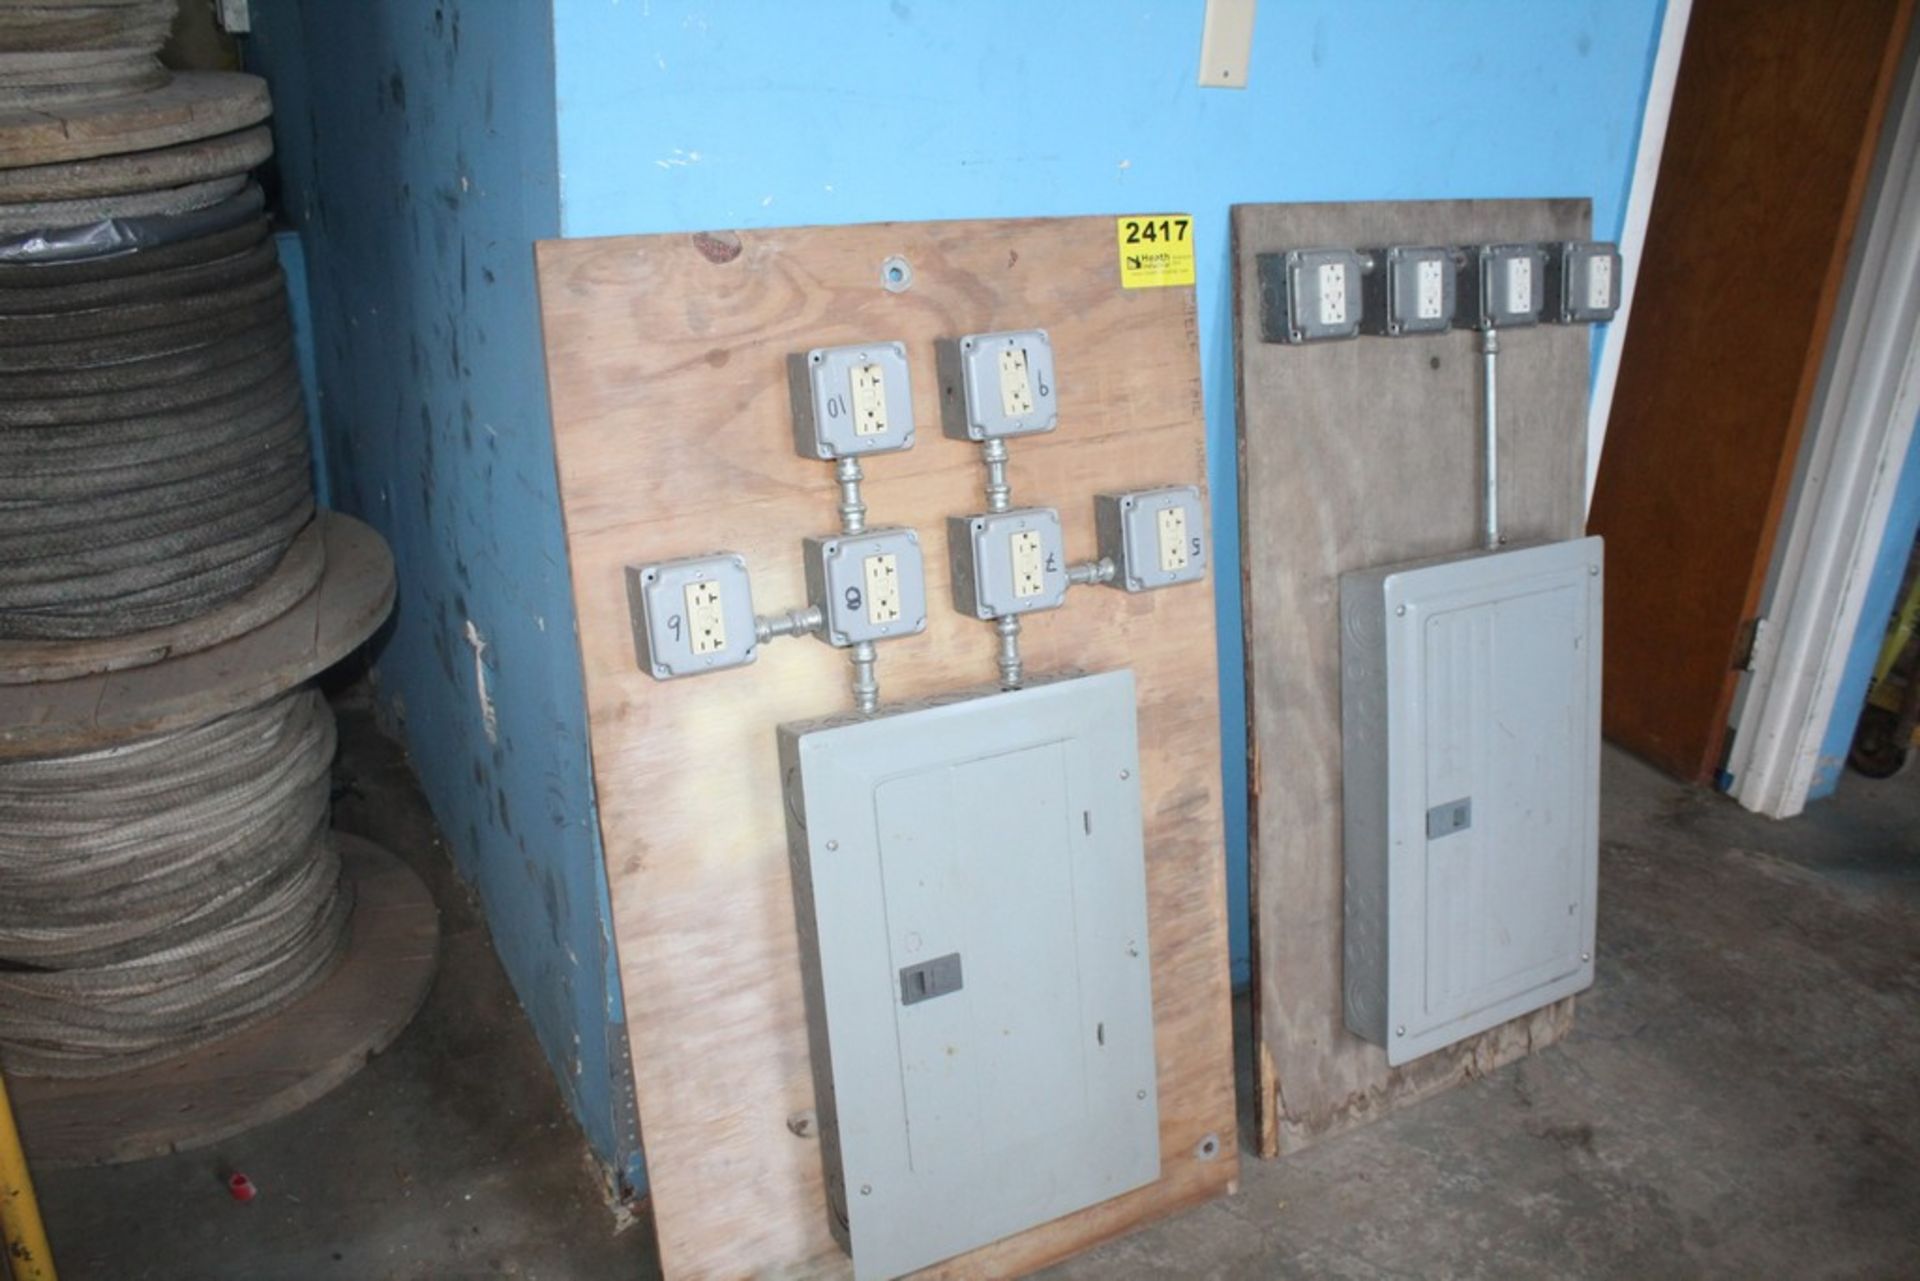 (2) TEMPORARY BREAKER BOXES WITH OUTLETS